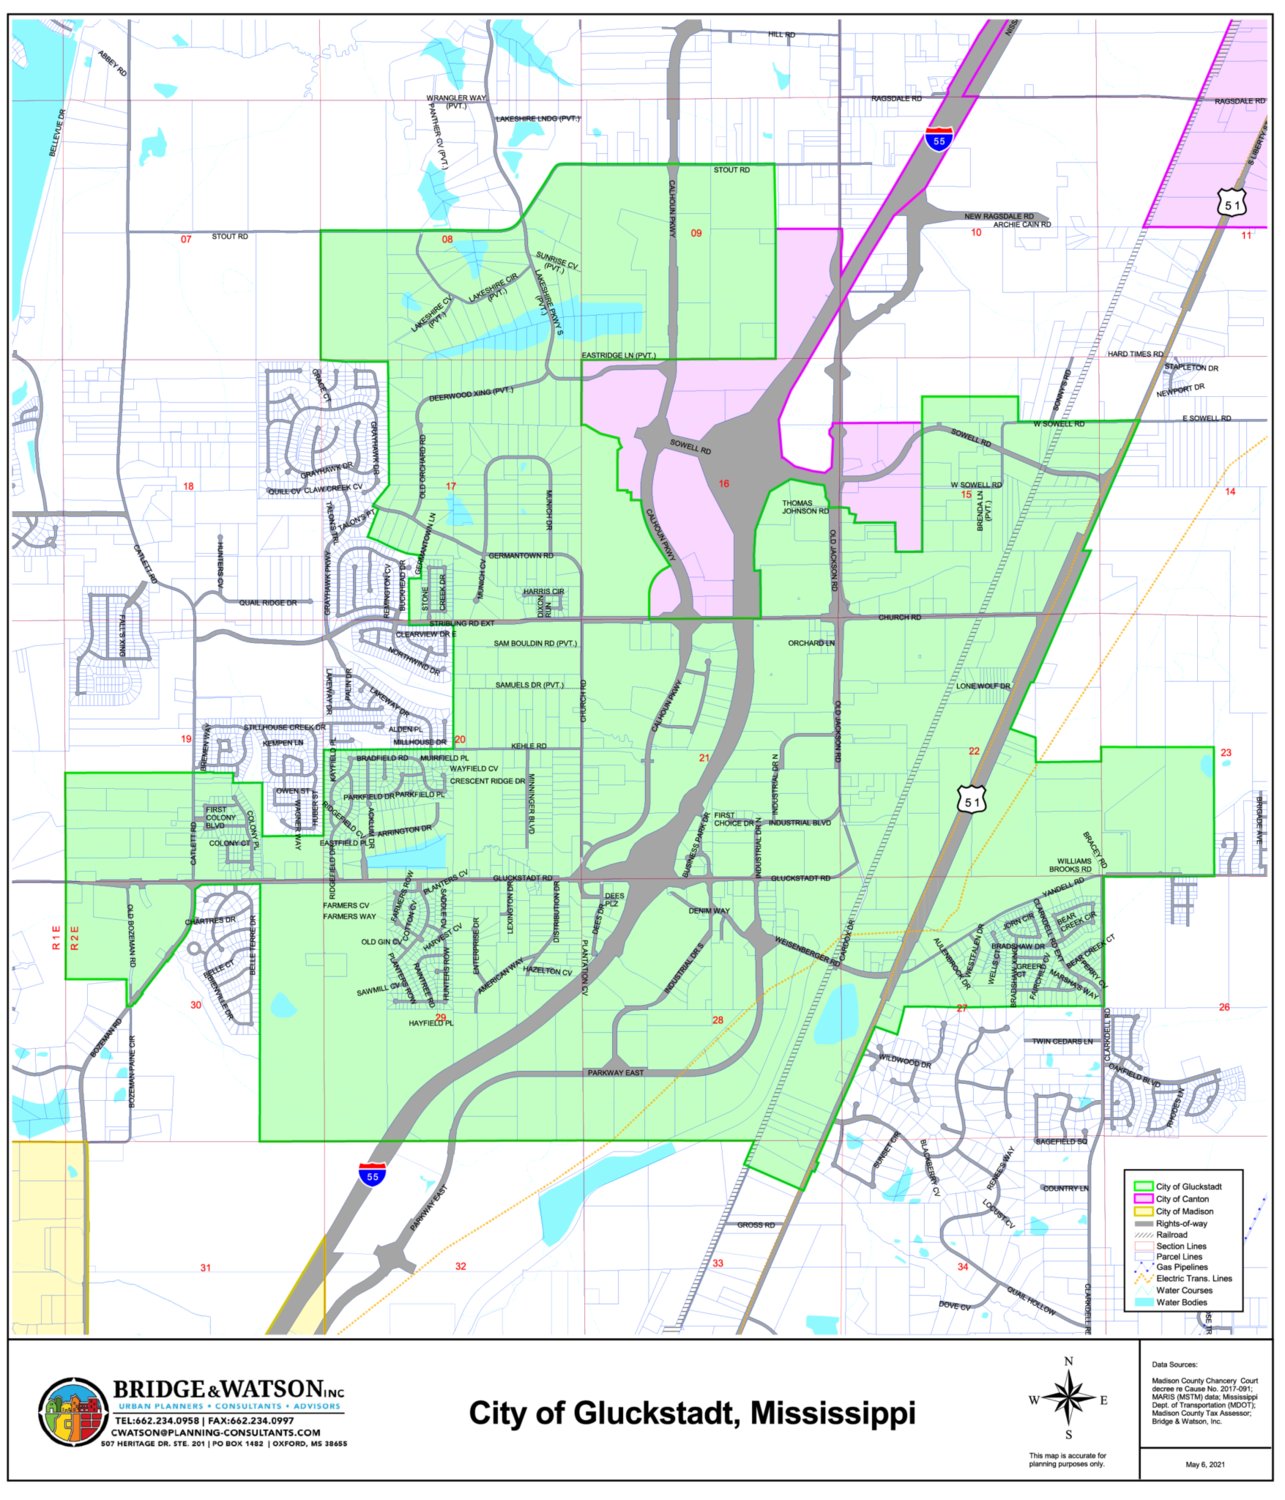 The new boundary lines for the proposed city of Gluckstadt are shown in green in the above map. The Mississippi Supreme Court last week upheld the incorporation effort after a two-decades-long battle.